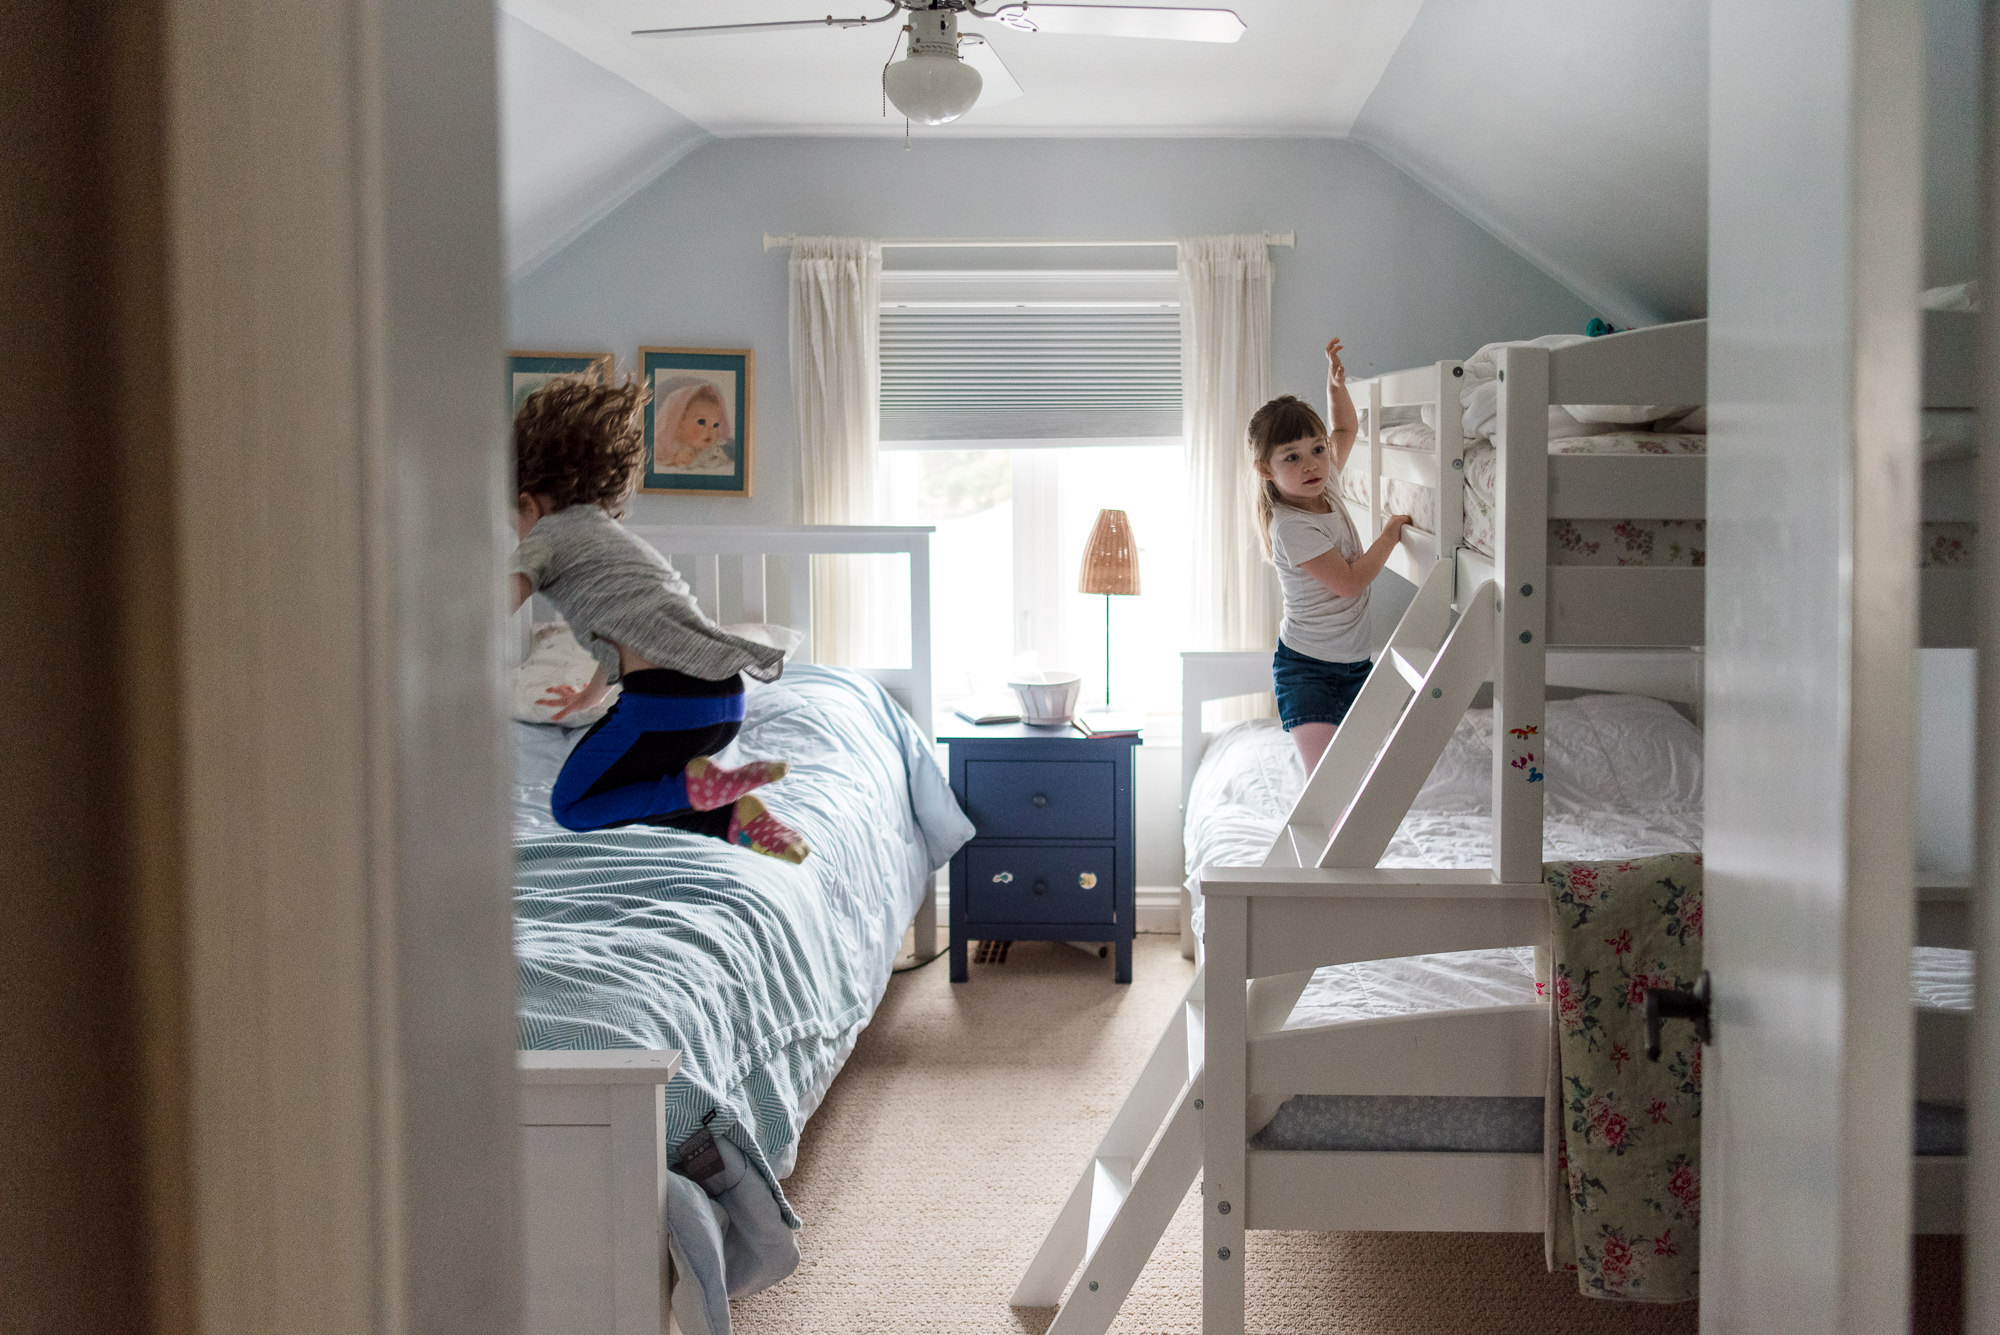 Kids jump on their beds as part of their documentary family photo session